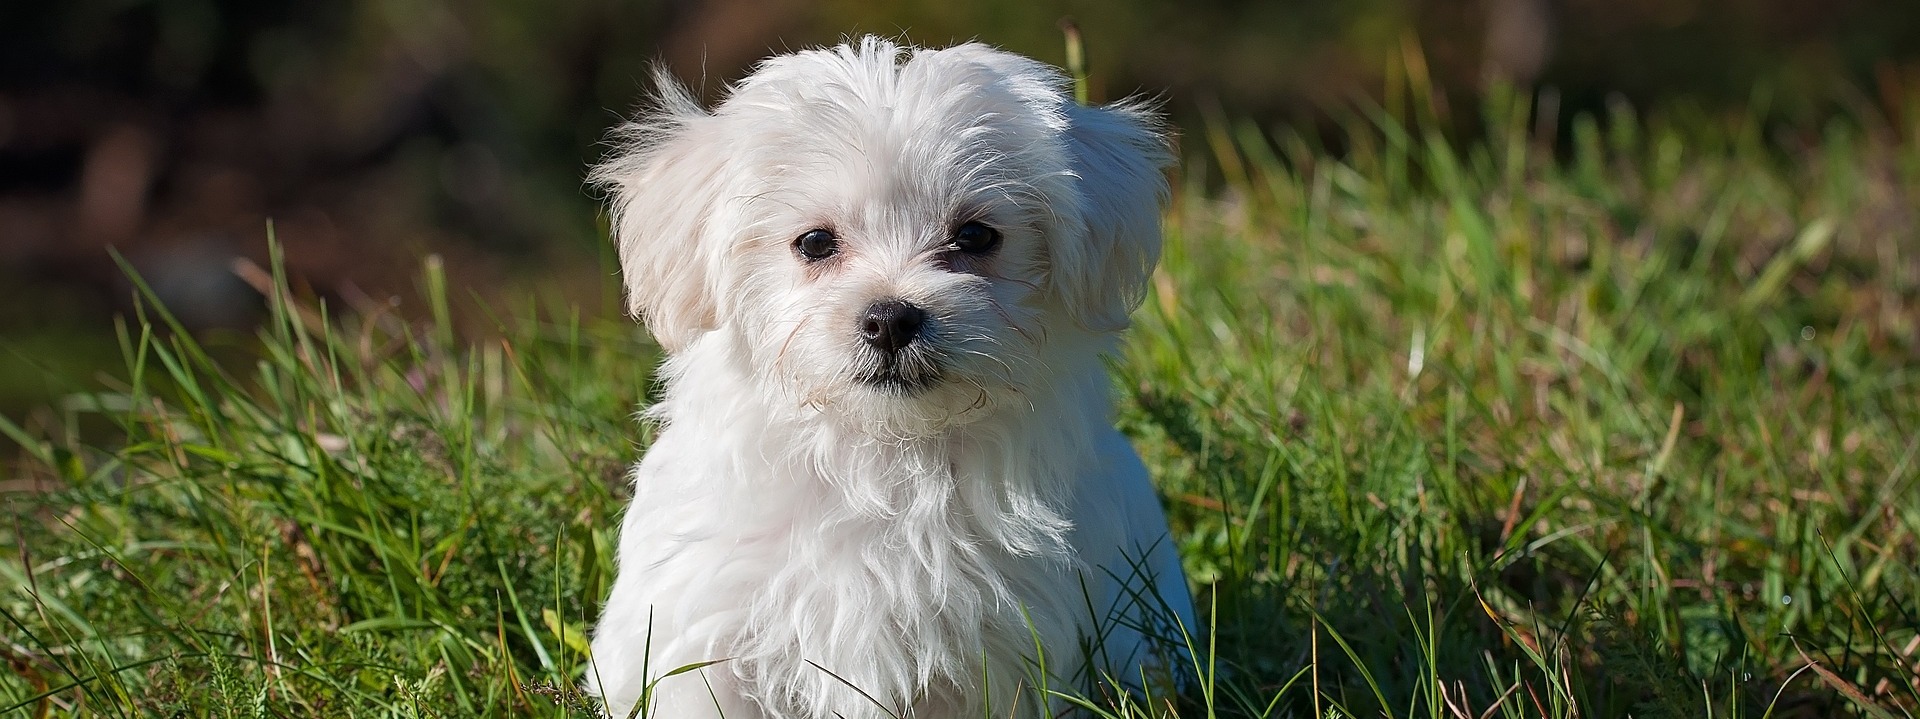 A Small White Fluffy Dog Sat In Grass